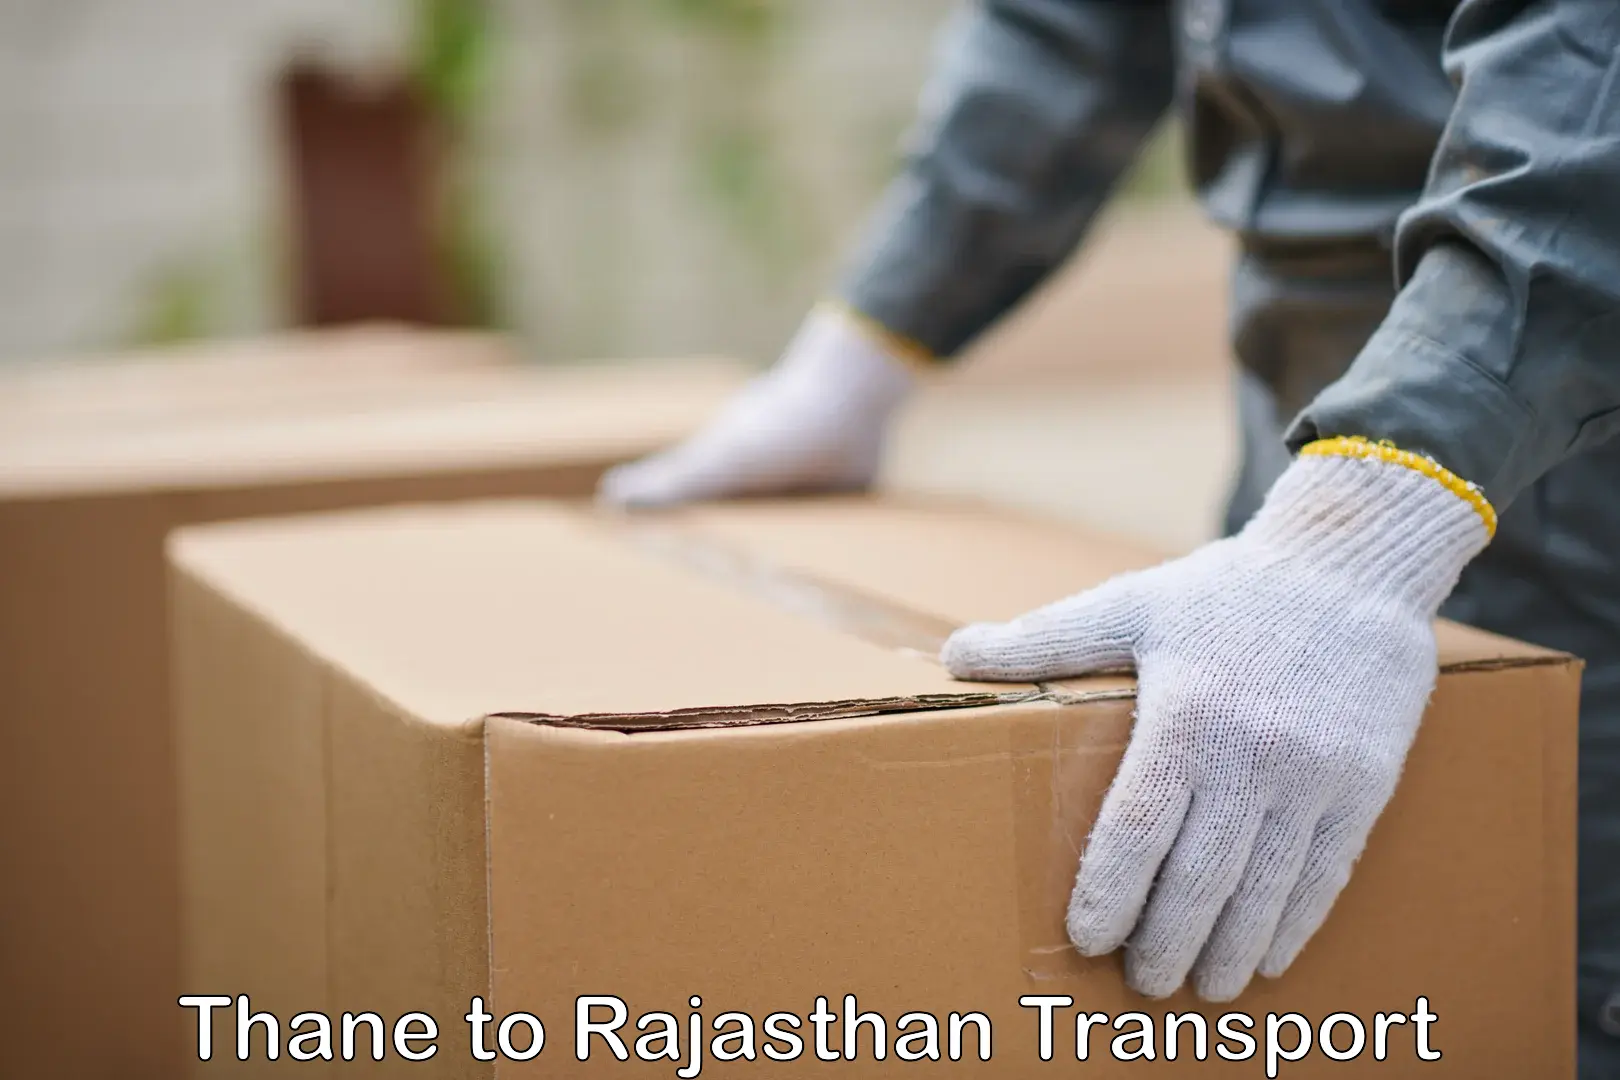 Truck transport companies in India Thane to Rajasthan